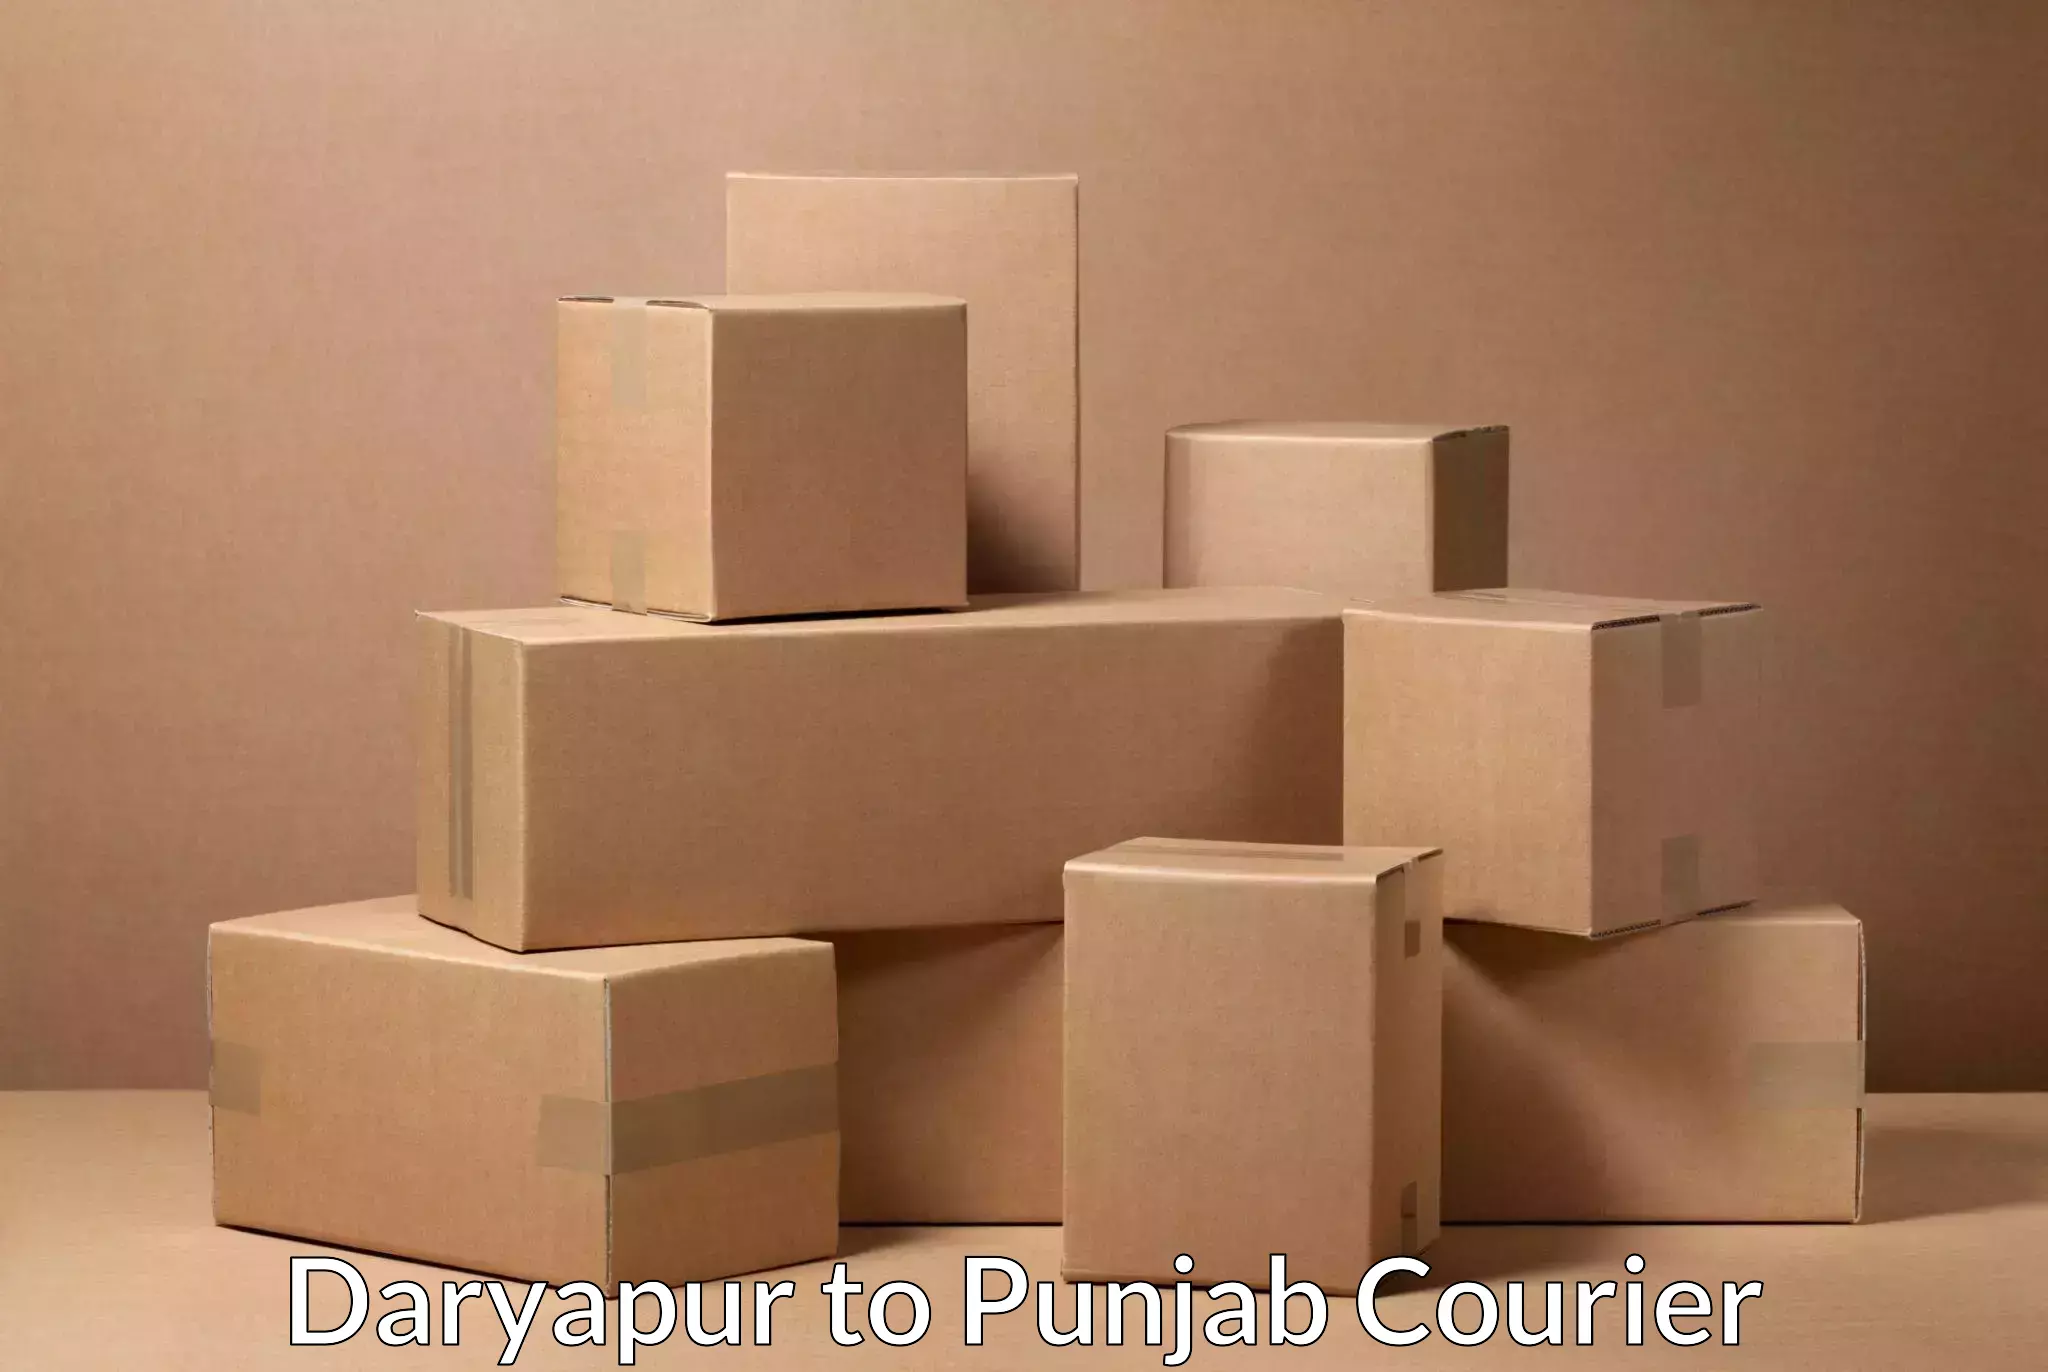 Courier rate comparison Daryapur to Mehta Chowk